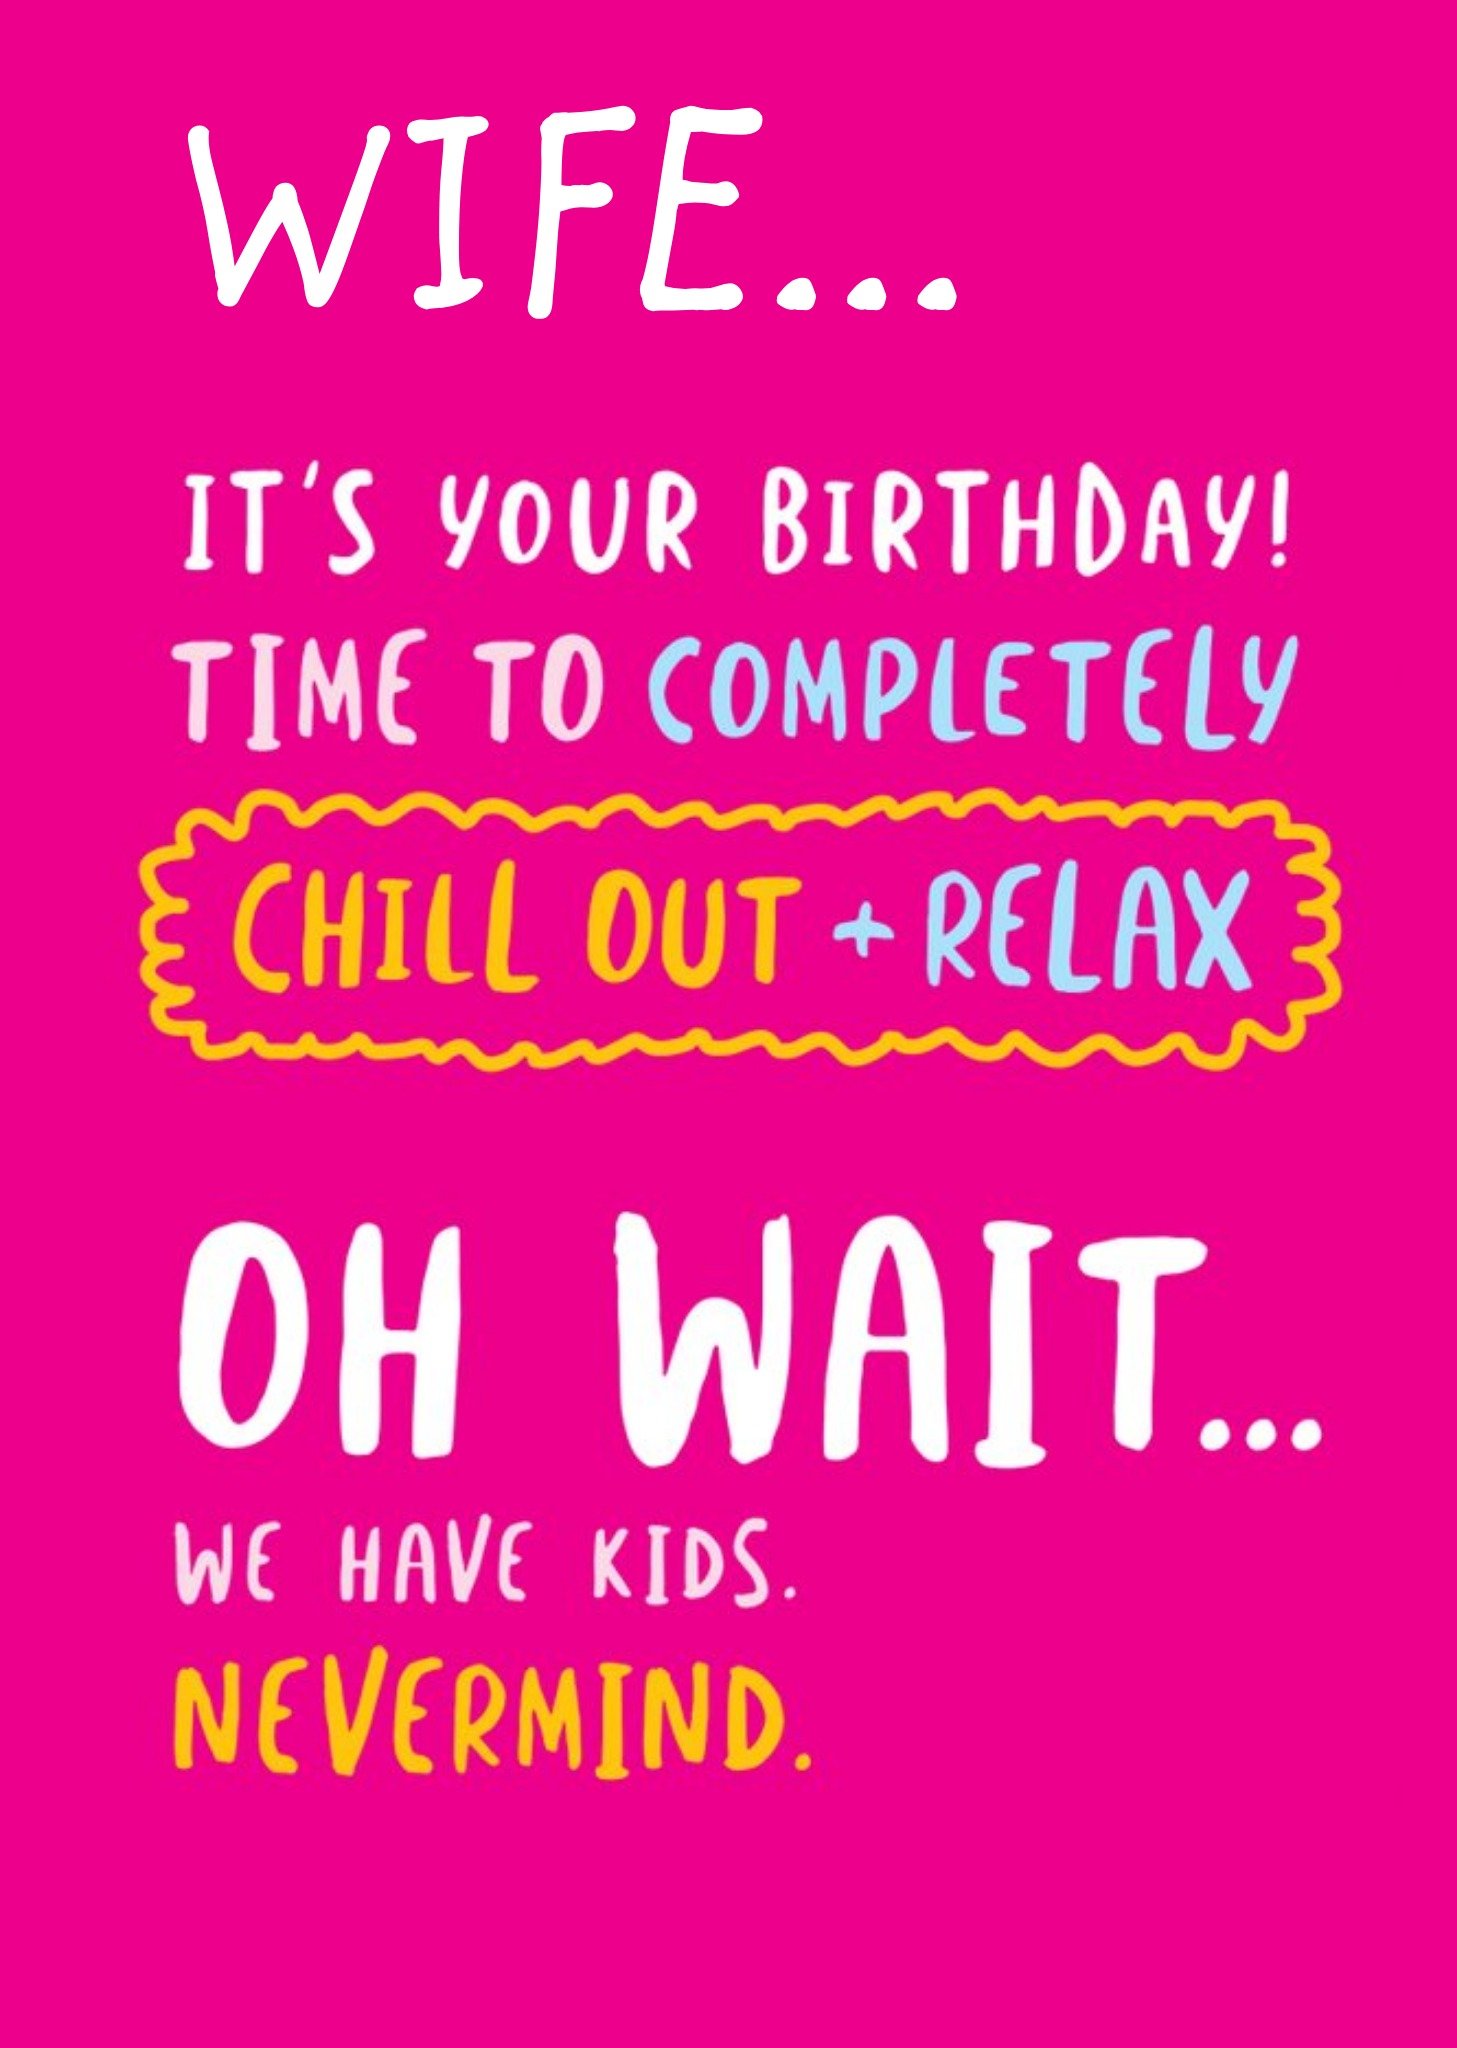 Moonpig Funny Birthday Card - Chill Out + Relax Ecard